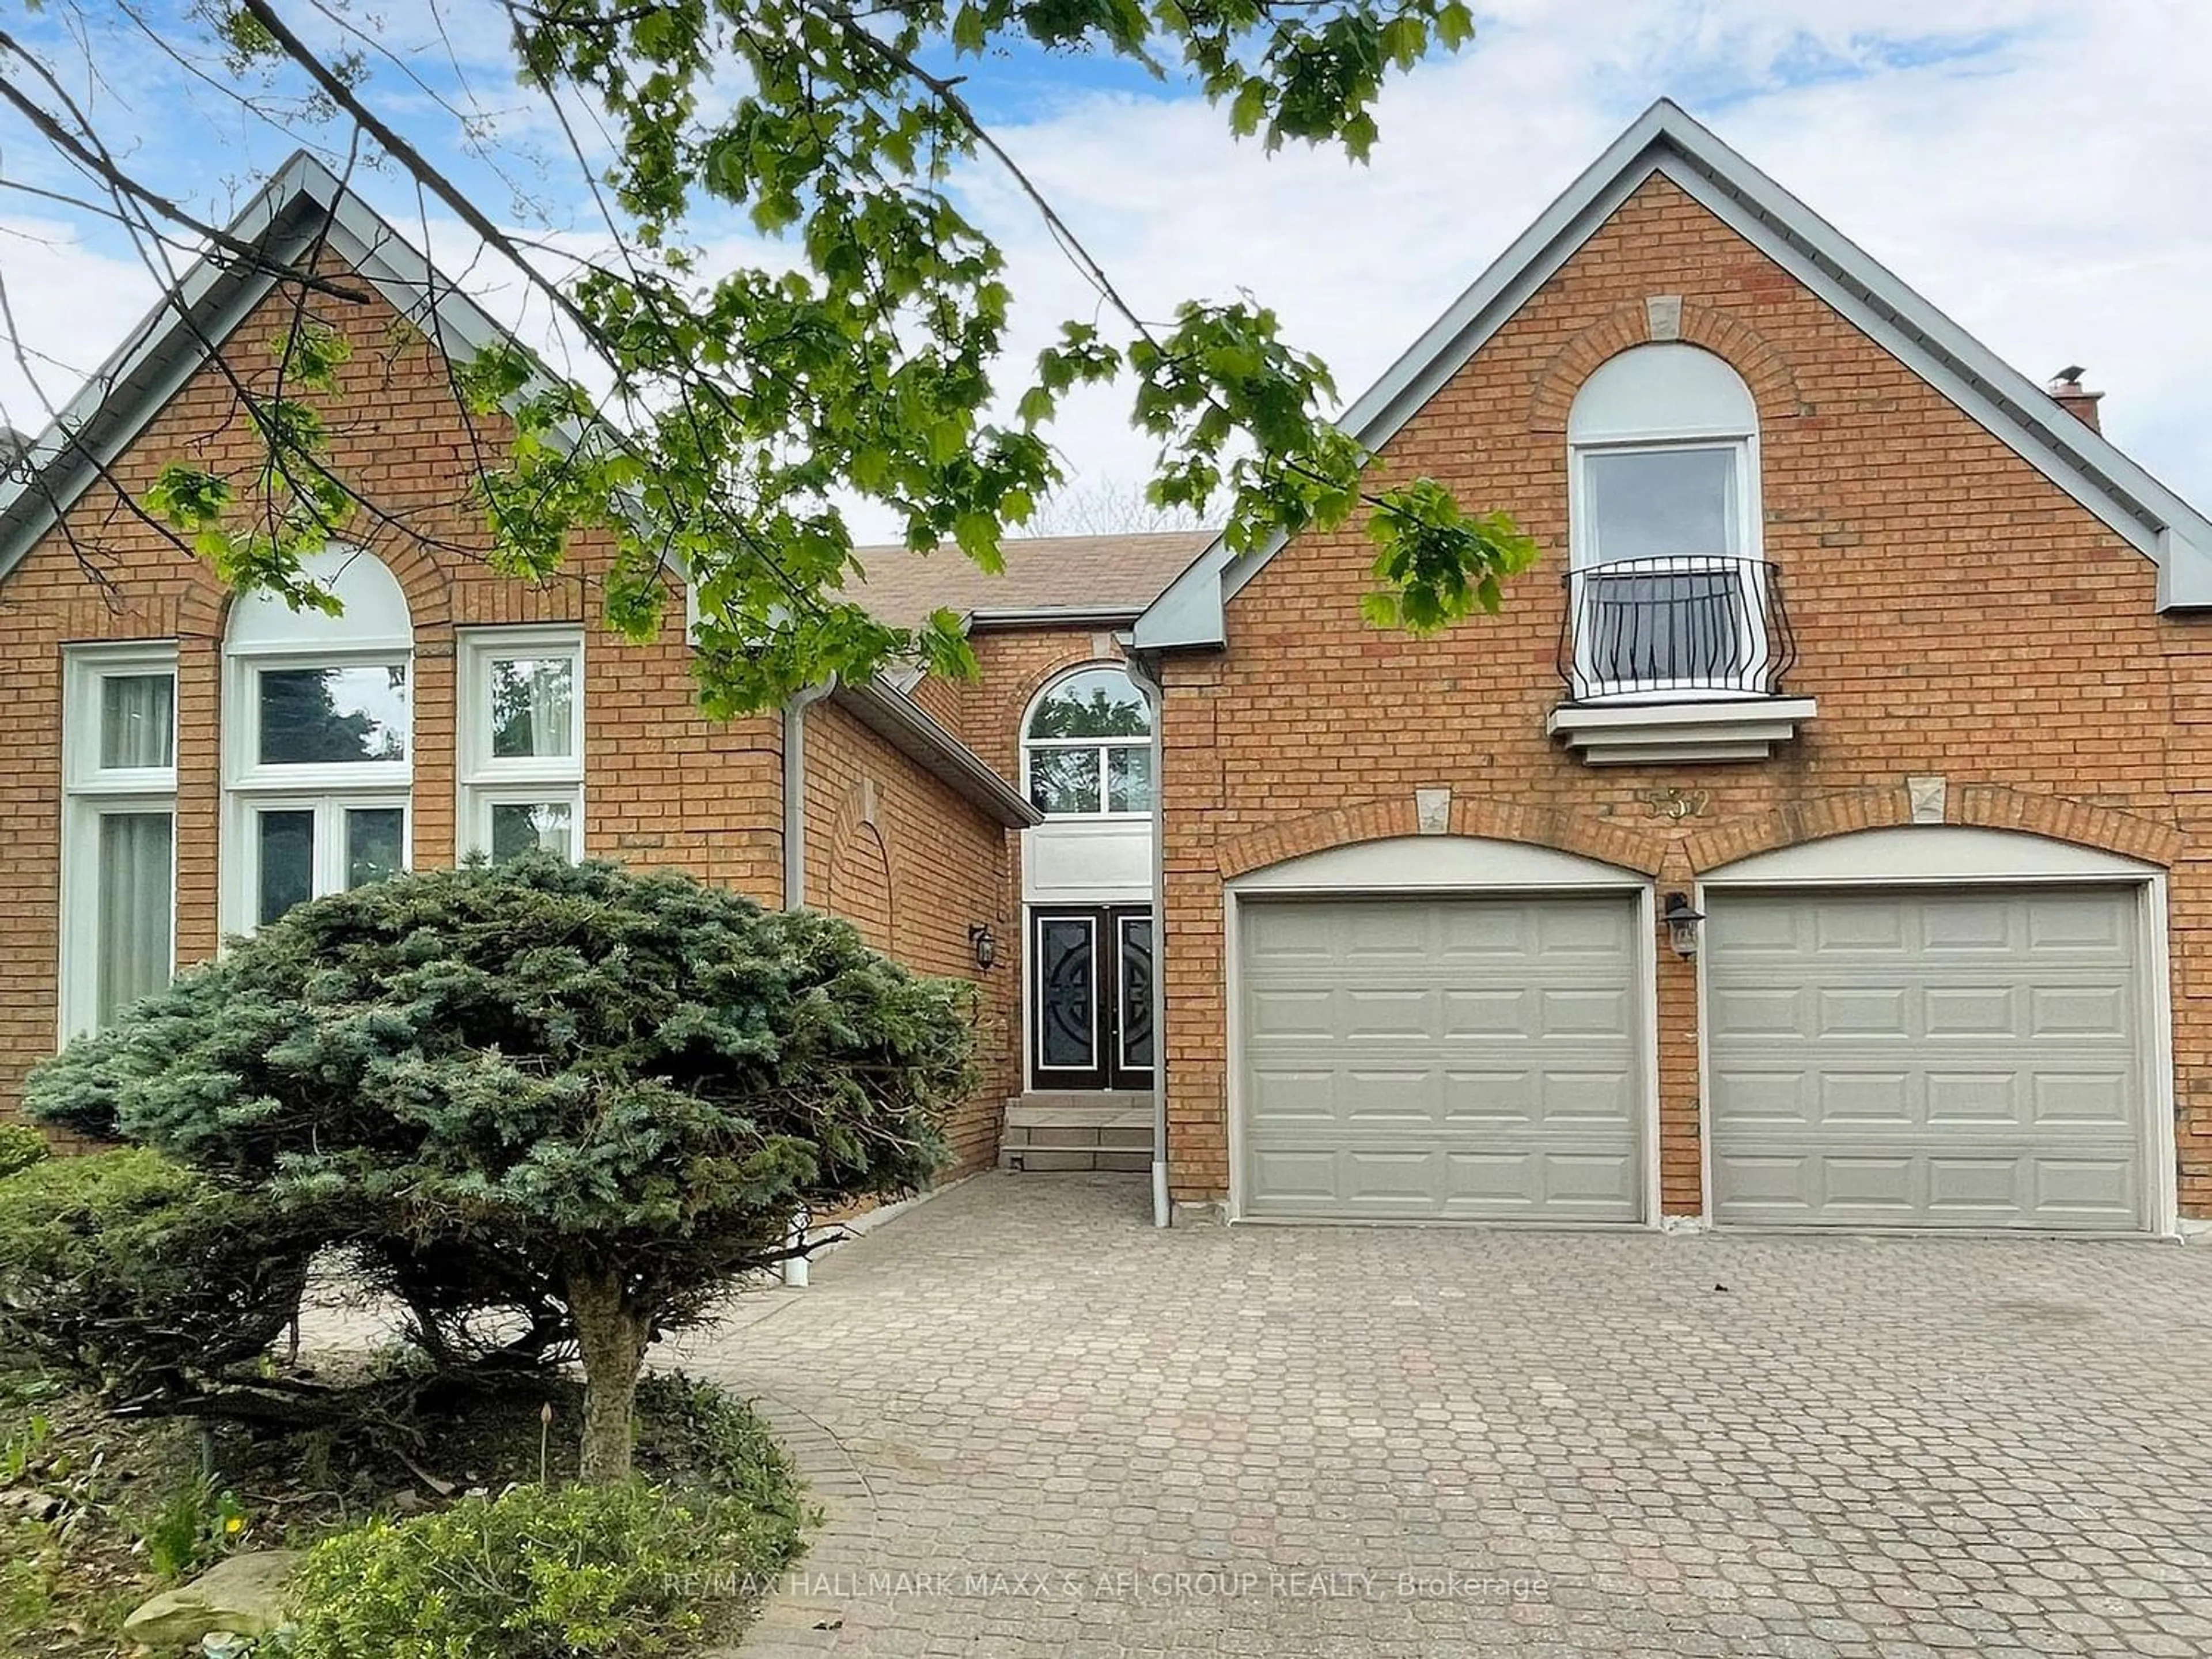 Home with brick exterior material for 532 Village Pkwy, Markham Ontario L3R 9N5